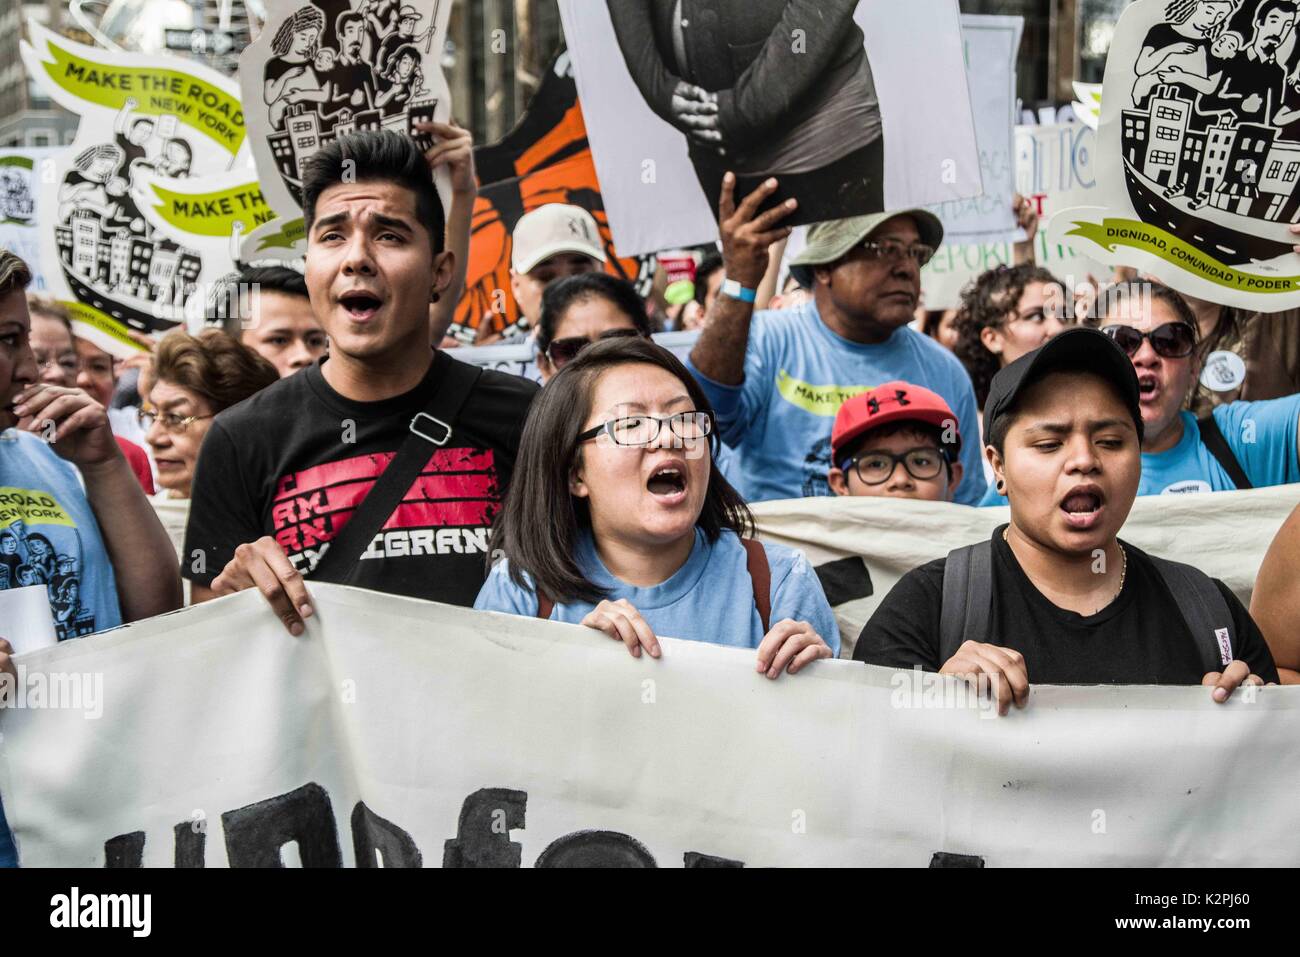 New York City, New York, USA. 30th Aug, 2017. Due to the review of the DACA Act (DEFERRED ACTION FOR CHILDHOOD ARRIVALS) by the Trump Administration, as well as expectation of the discontinuation of the program, 1,500 New Yorkers gathered at the Trump International Hotel and Tower to demonstrate their support for the act. The DACA Act gives protection against deportation to undocumented young people under 31 years of age, so long as they fulfill certain requirements. Furthermore, the act allows them to attend schools and obtain work permits. The Trump Administration Stock Photo